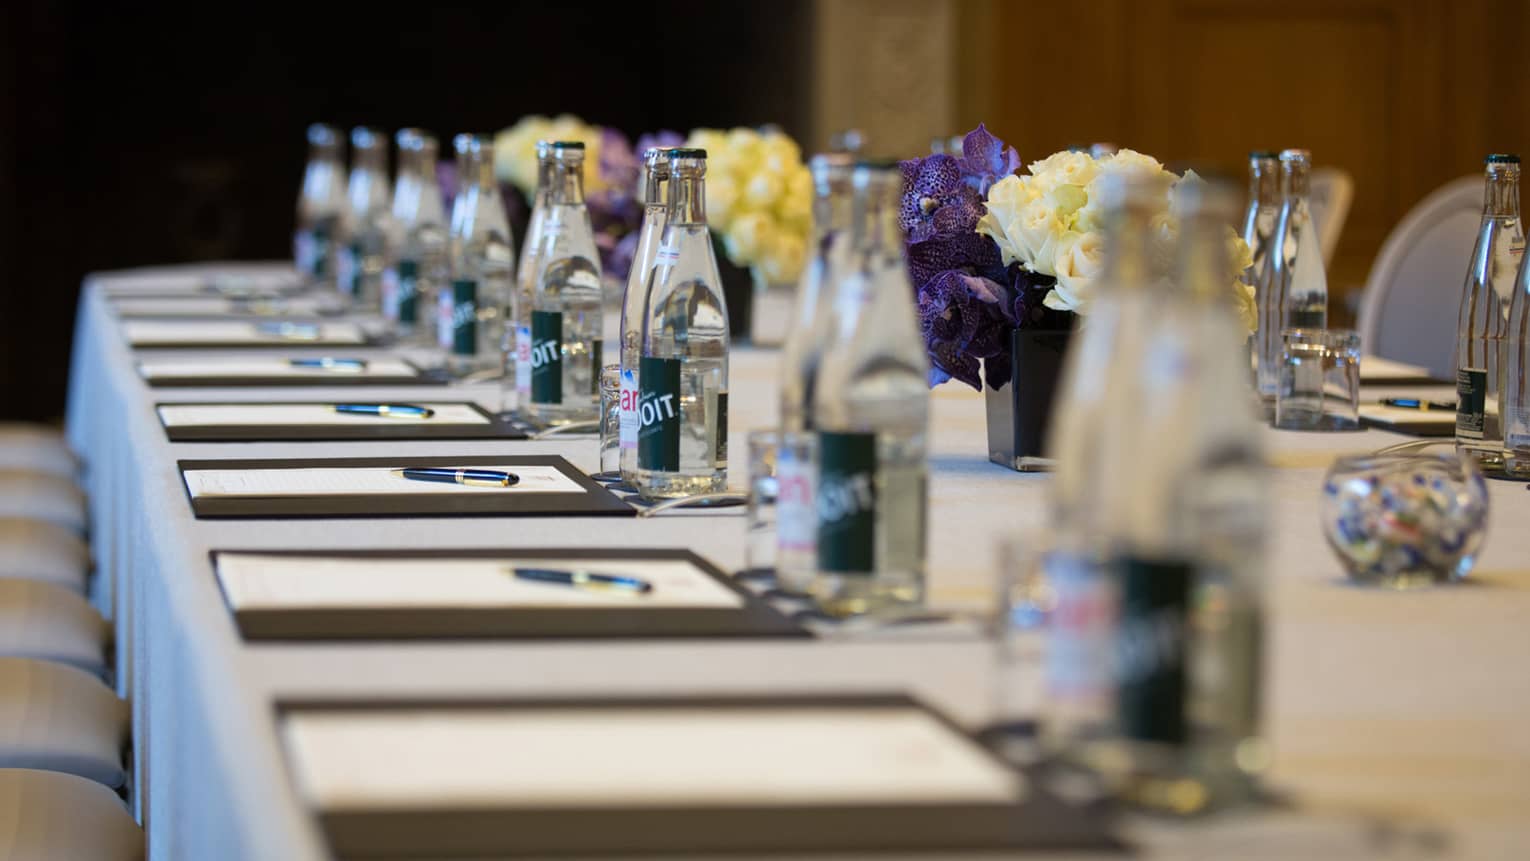 Row of meeting agendas, glass bottles, small vases with flowers on boardroom table